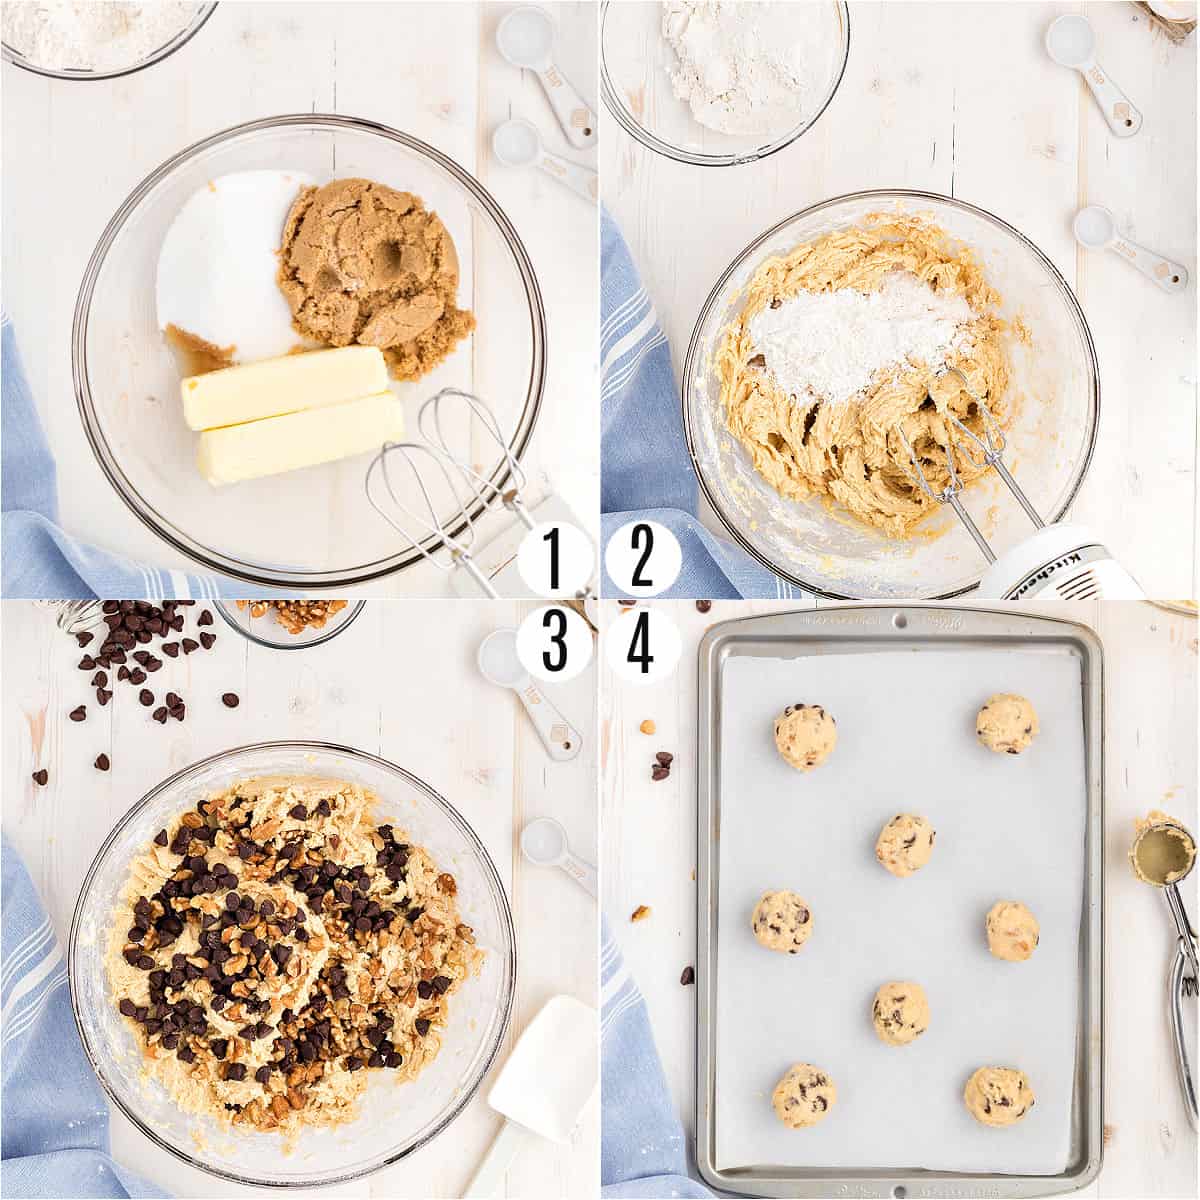 Step by step photos showing how to make toll house chocolate chip cookies.